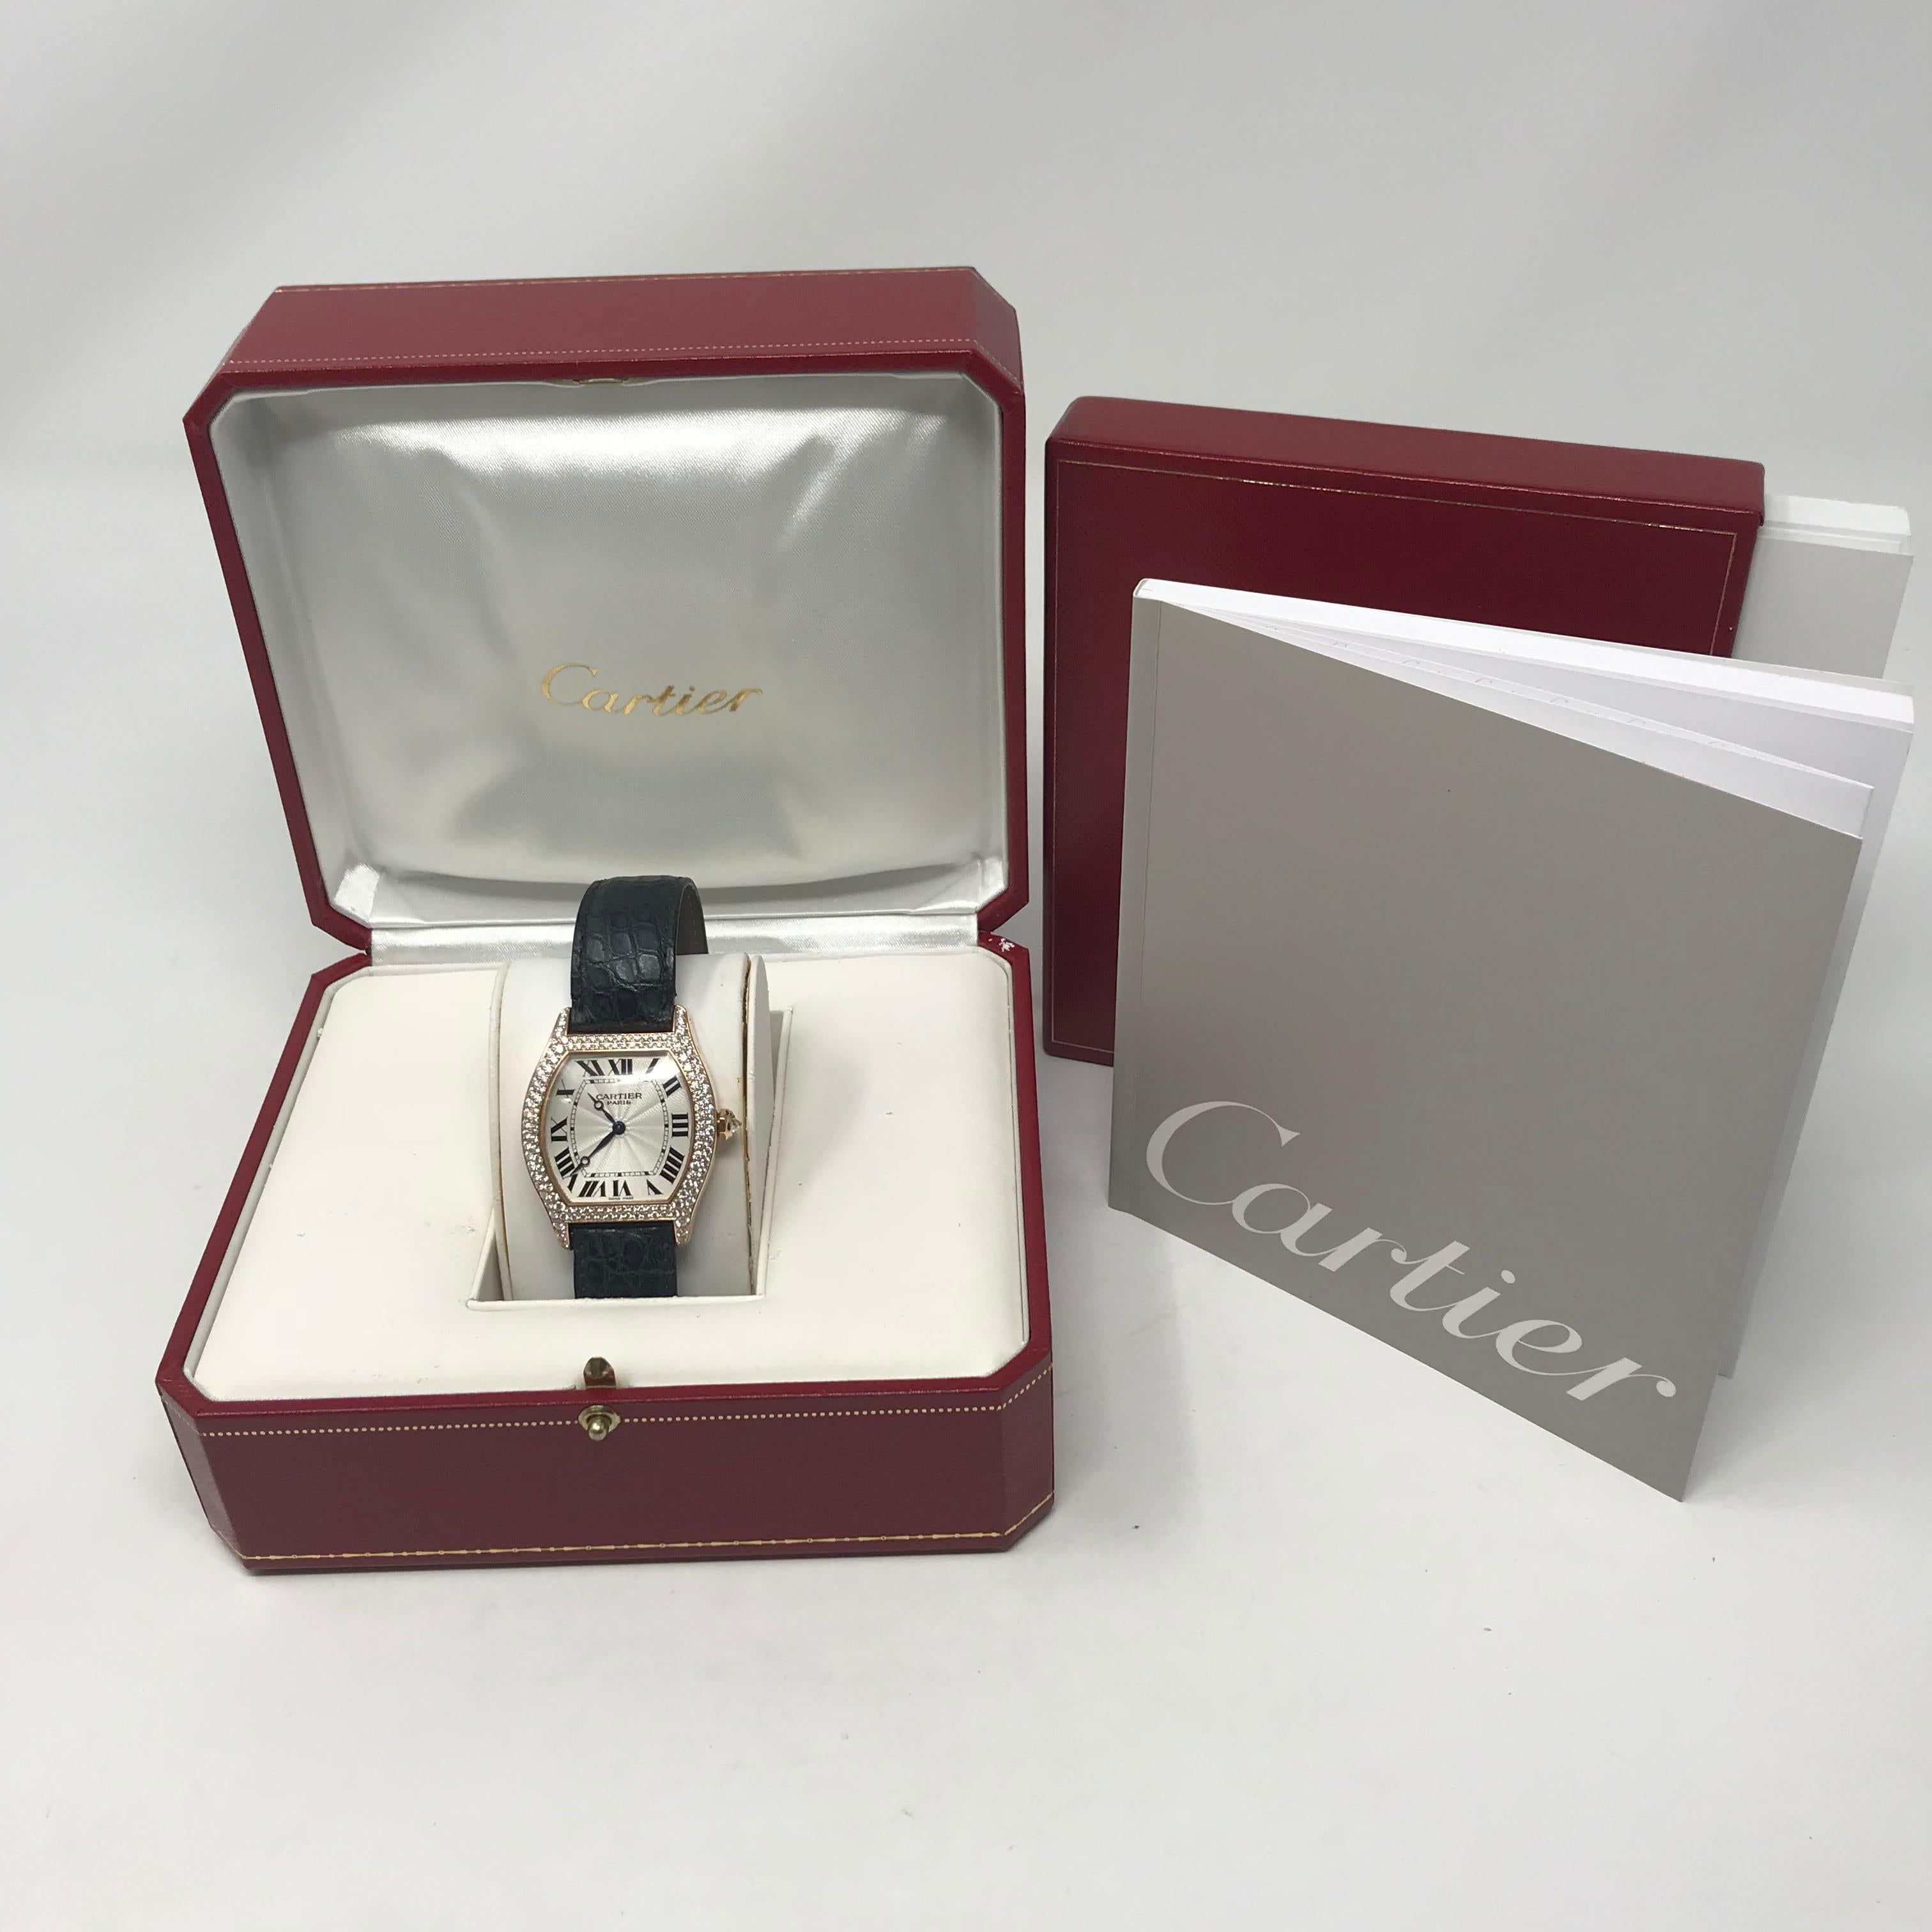 Cartier Tortue Collection De Privee Rose Gold Watch With Diamonds 4